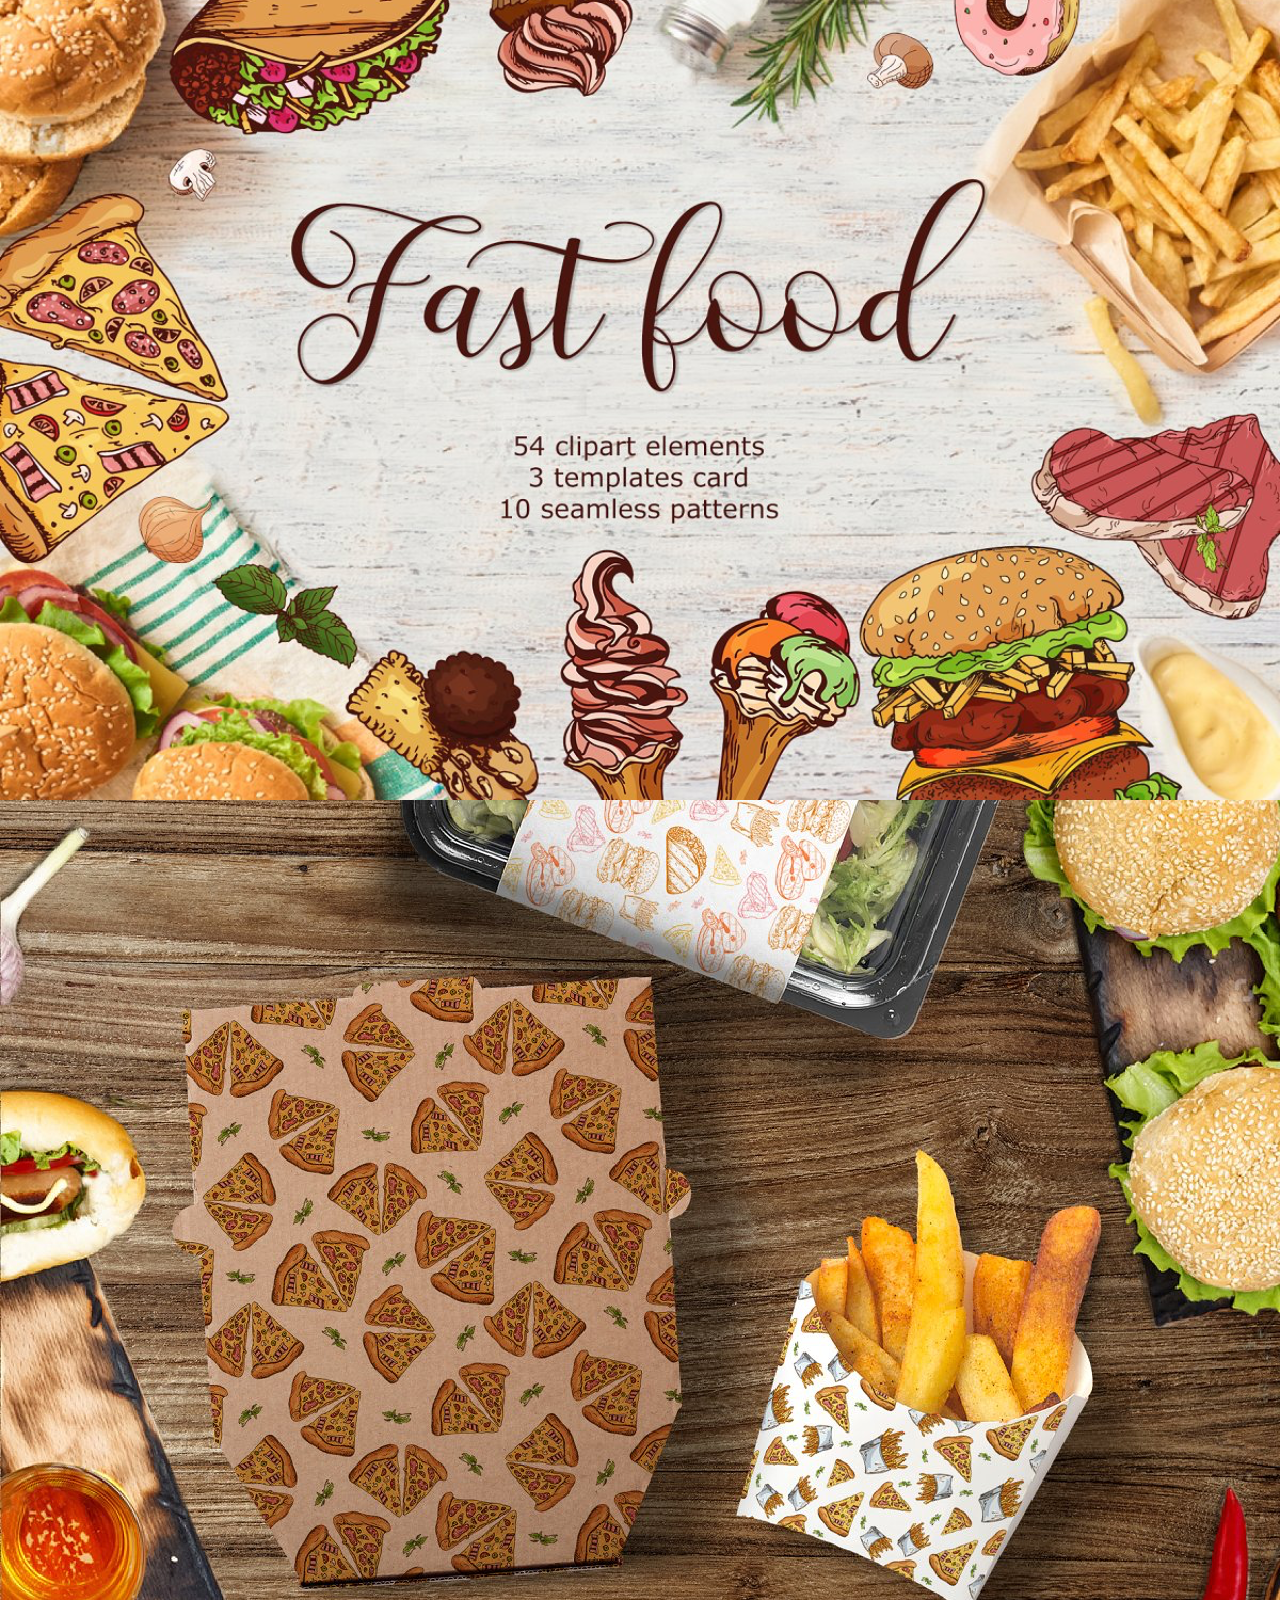 Fast food clipart pinterest image.